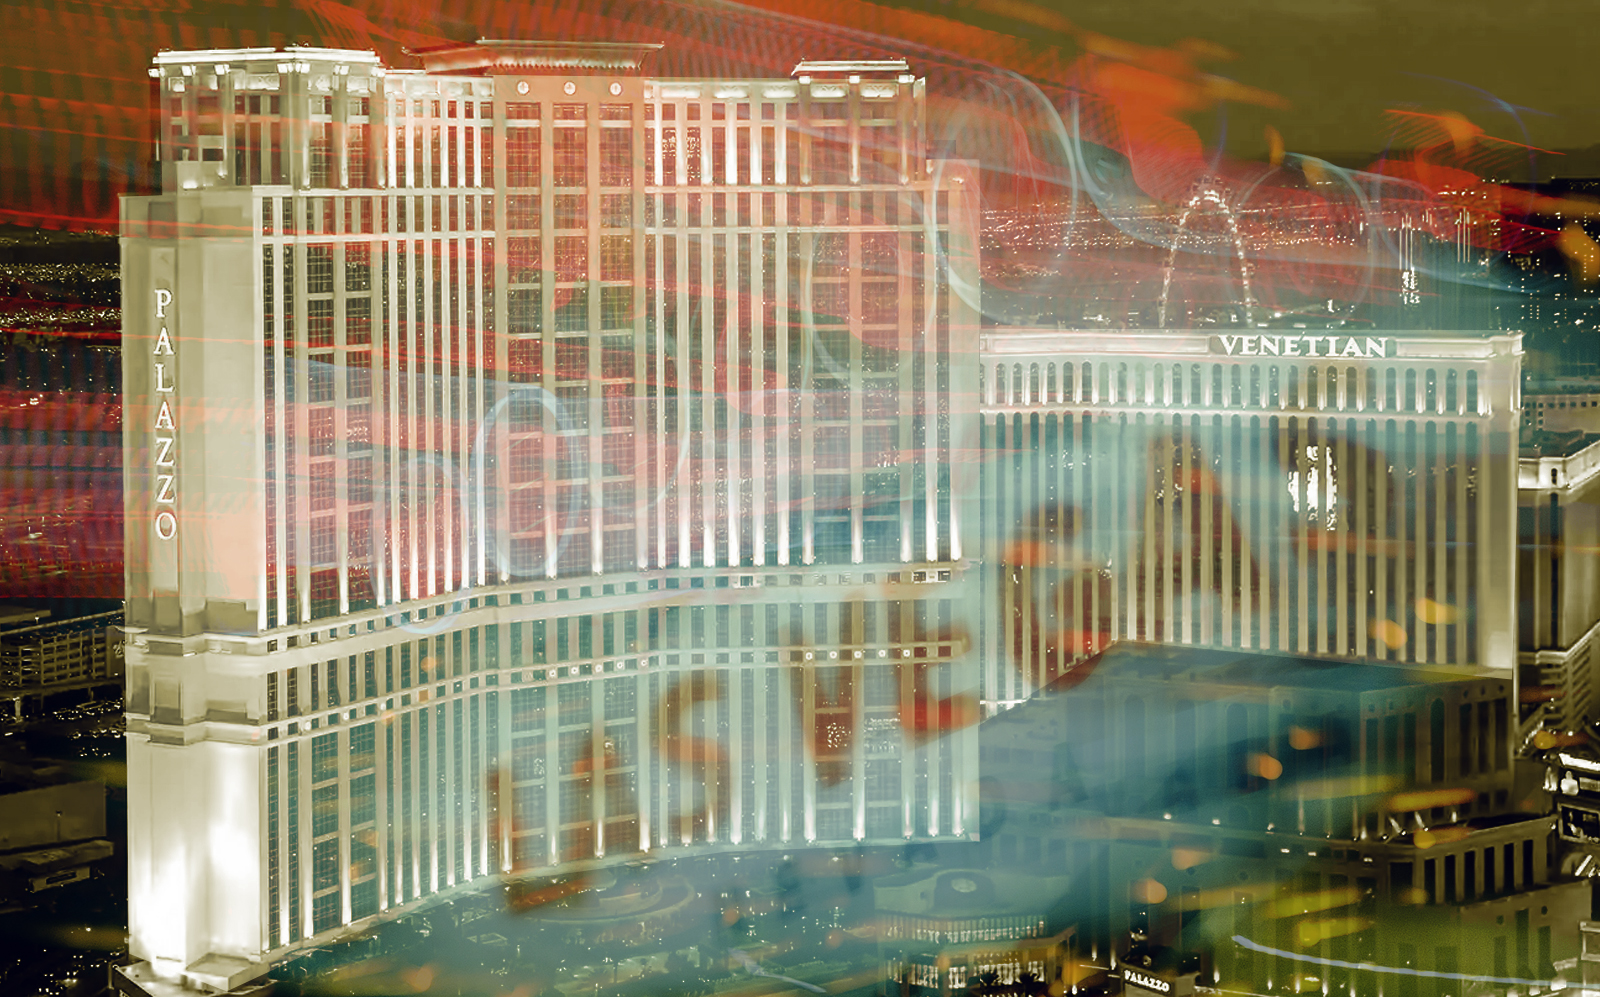 The Venetian and The Palazzo in Las Vegas. (Getty, The Venetian)